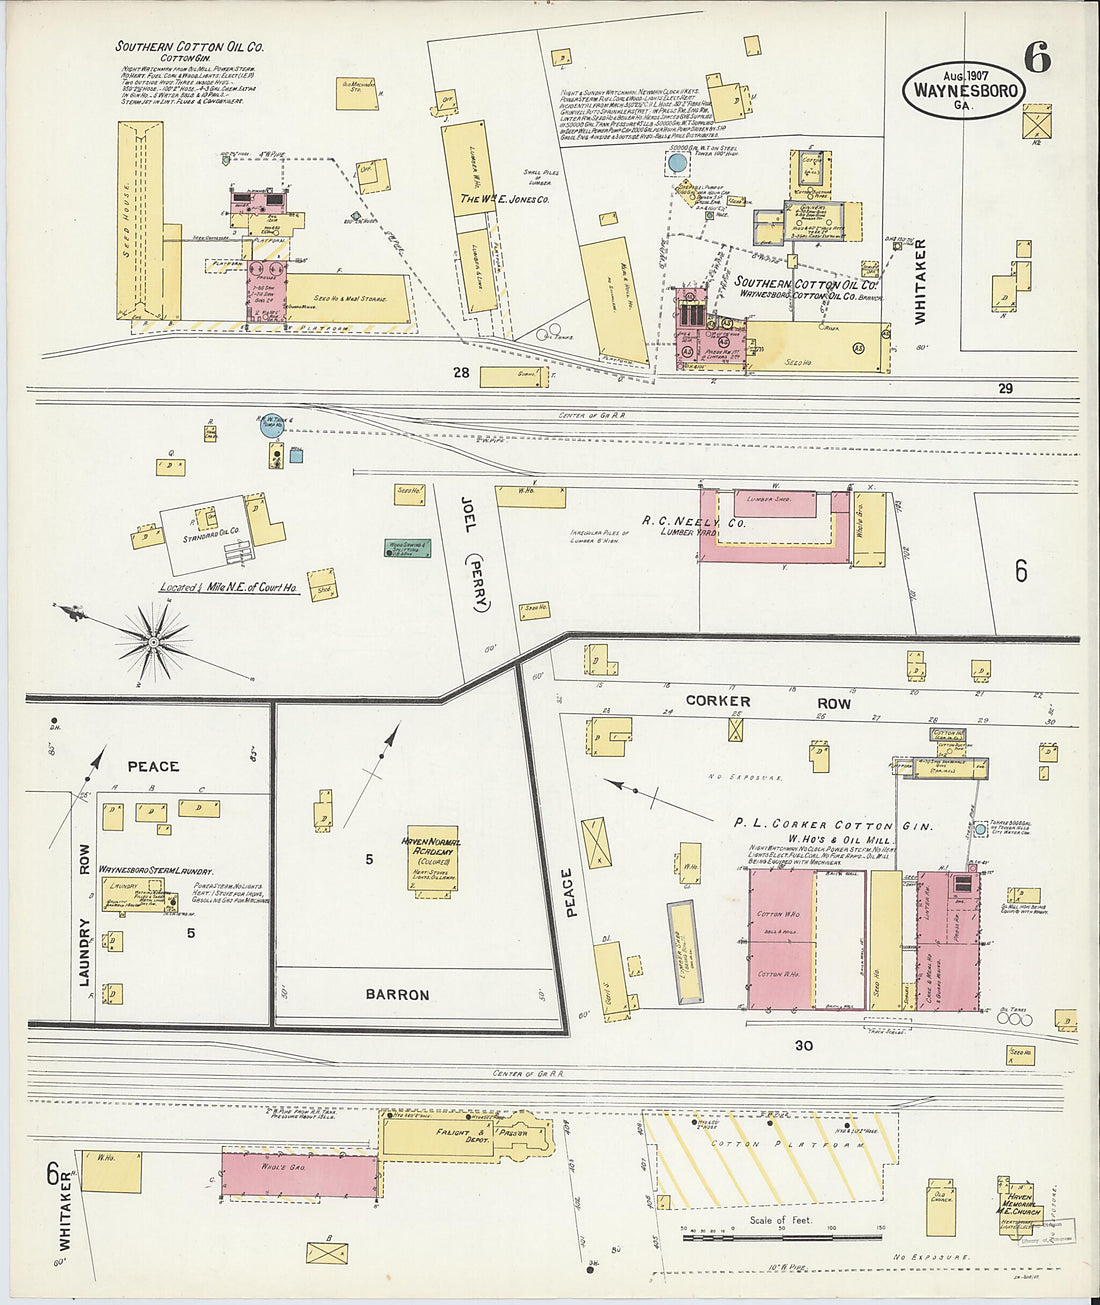 This old map of Waynesboro, Burke County, Georgia was created by Sanborn Map Company in 1907